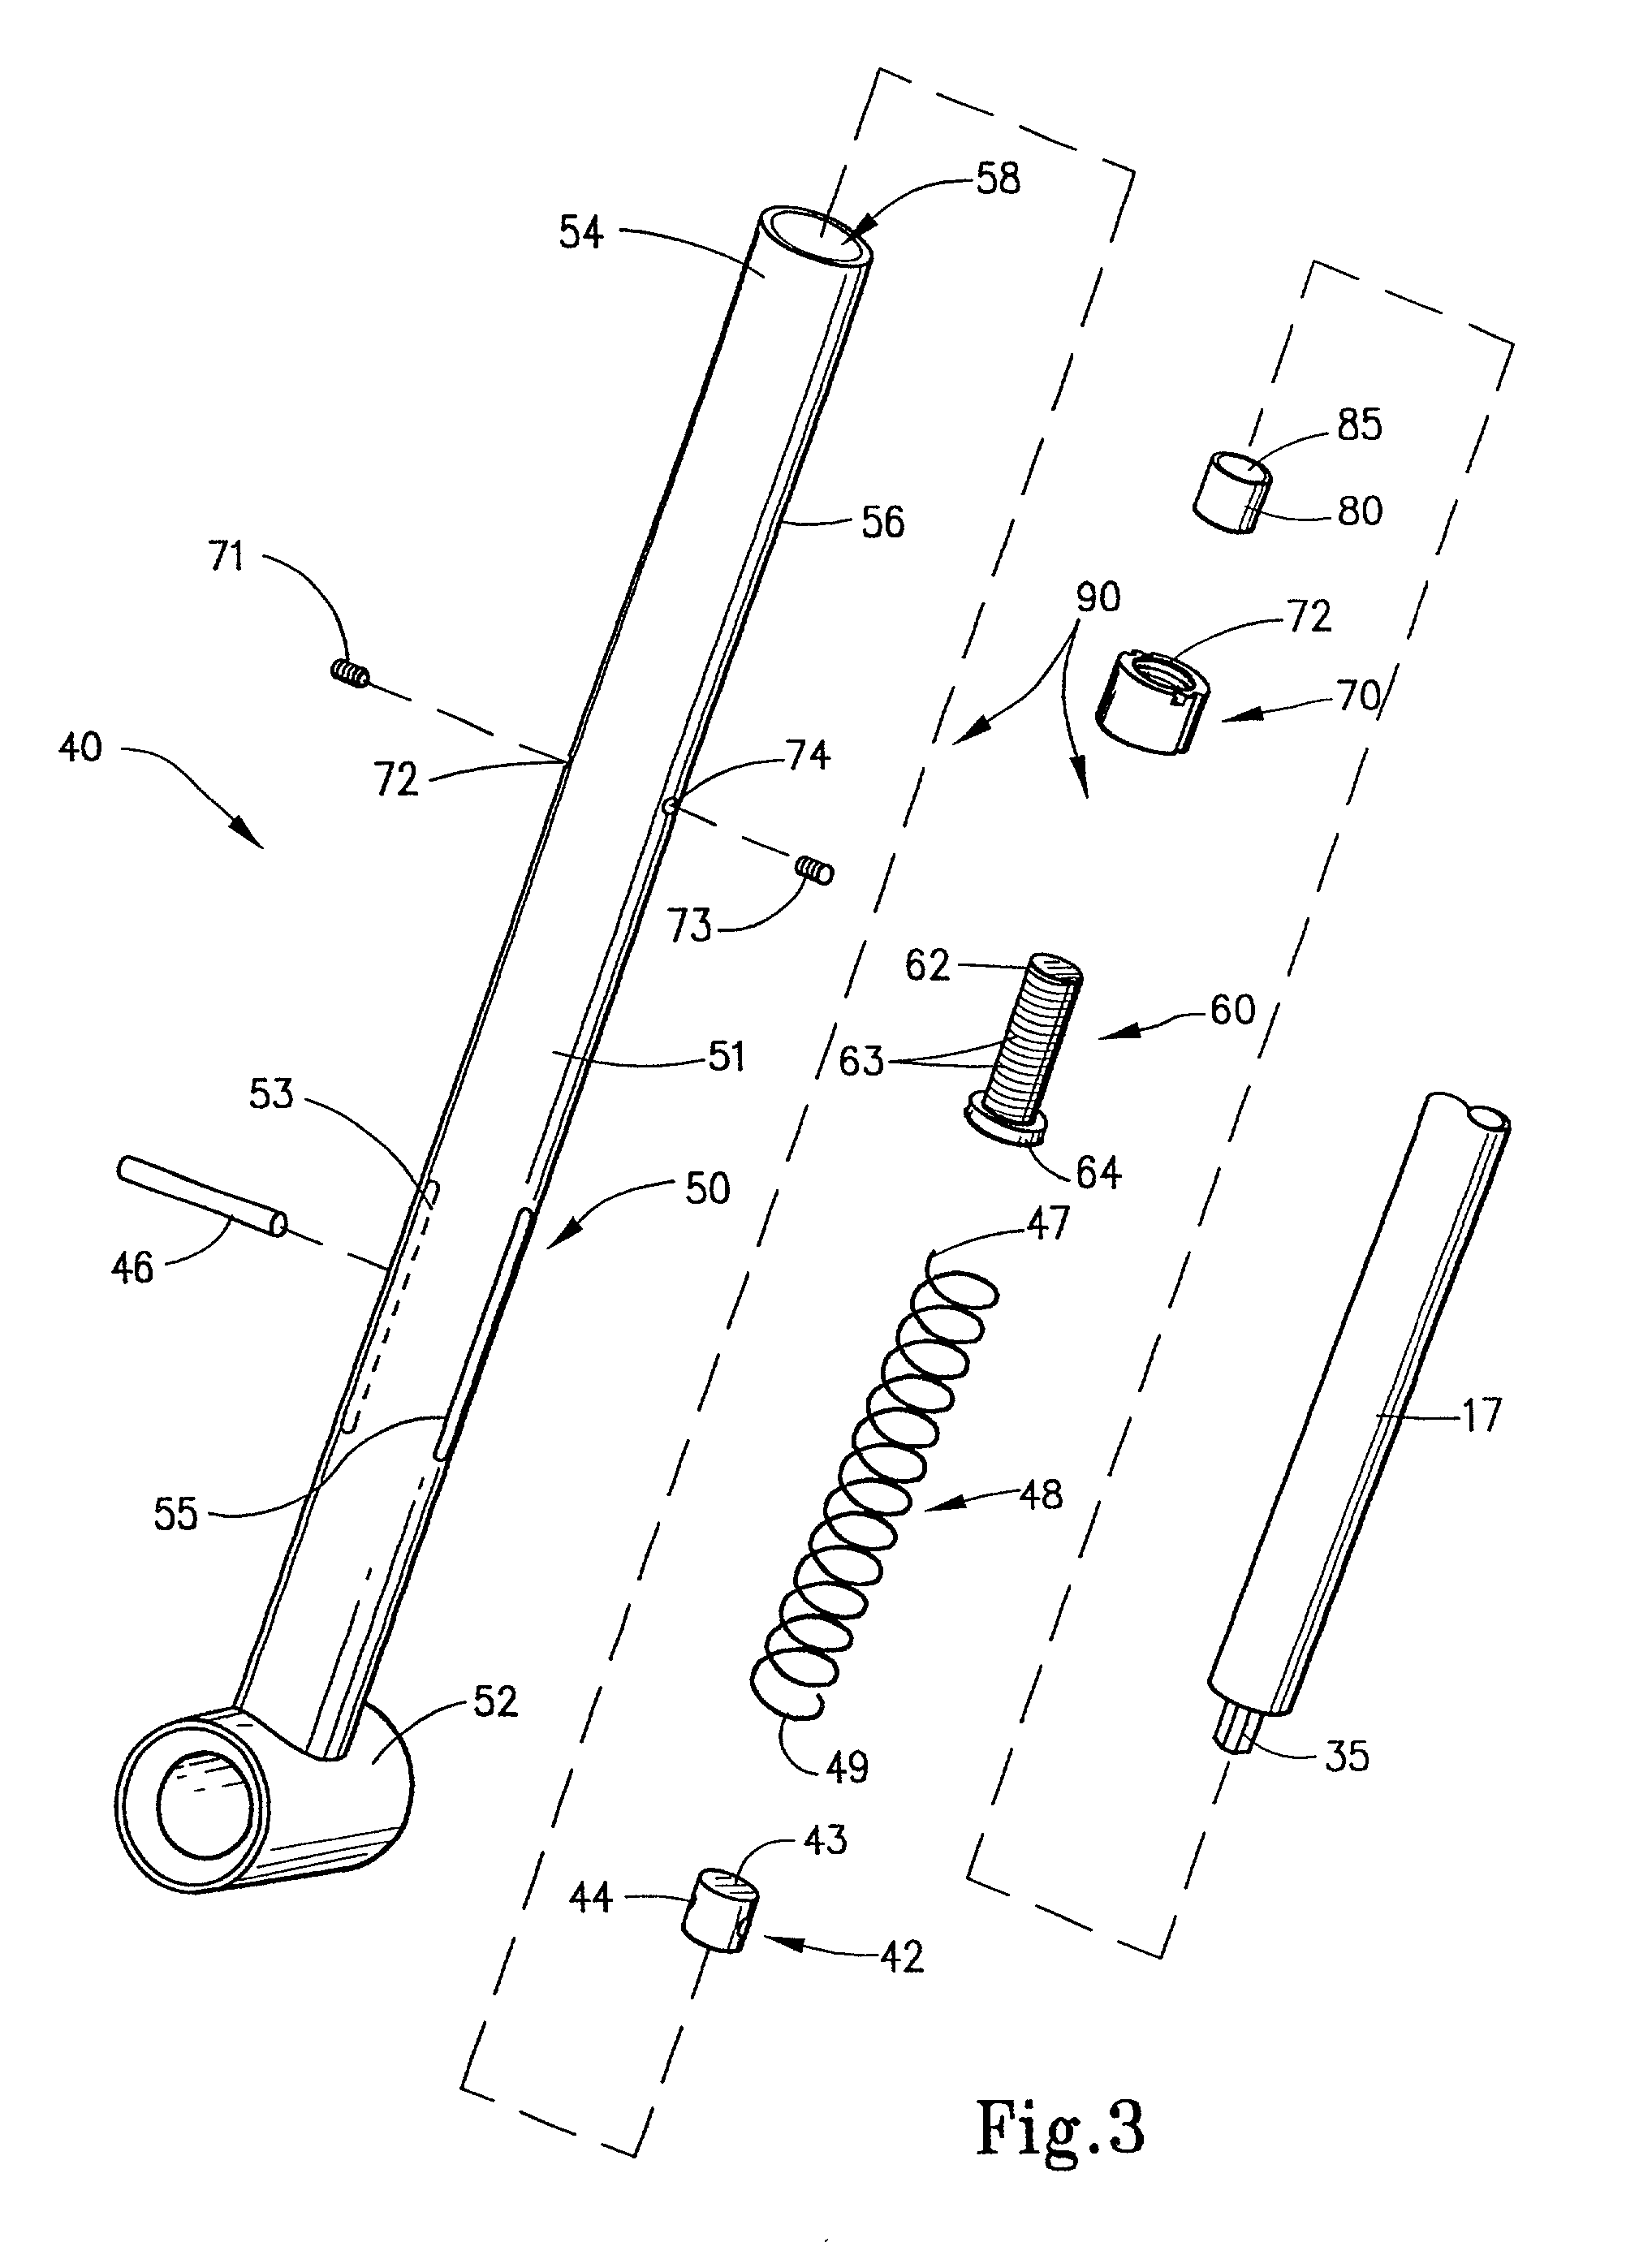 Shock absorber for cycle and methodology incorporating the same